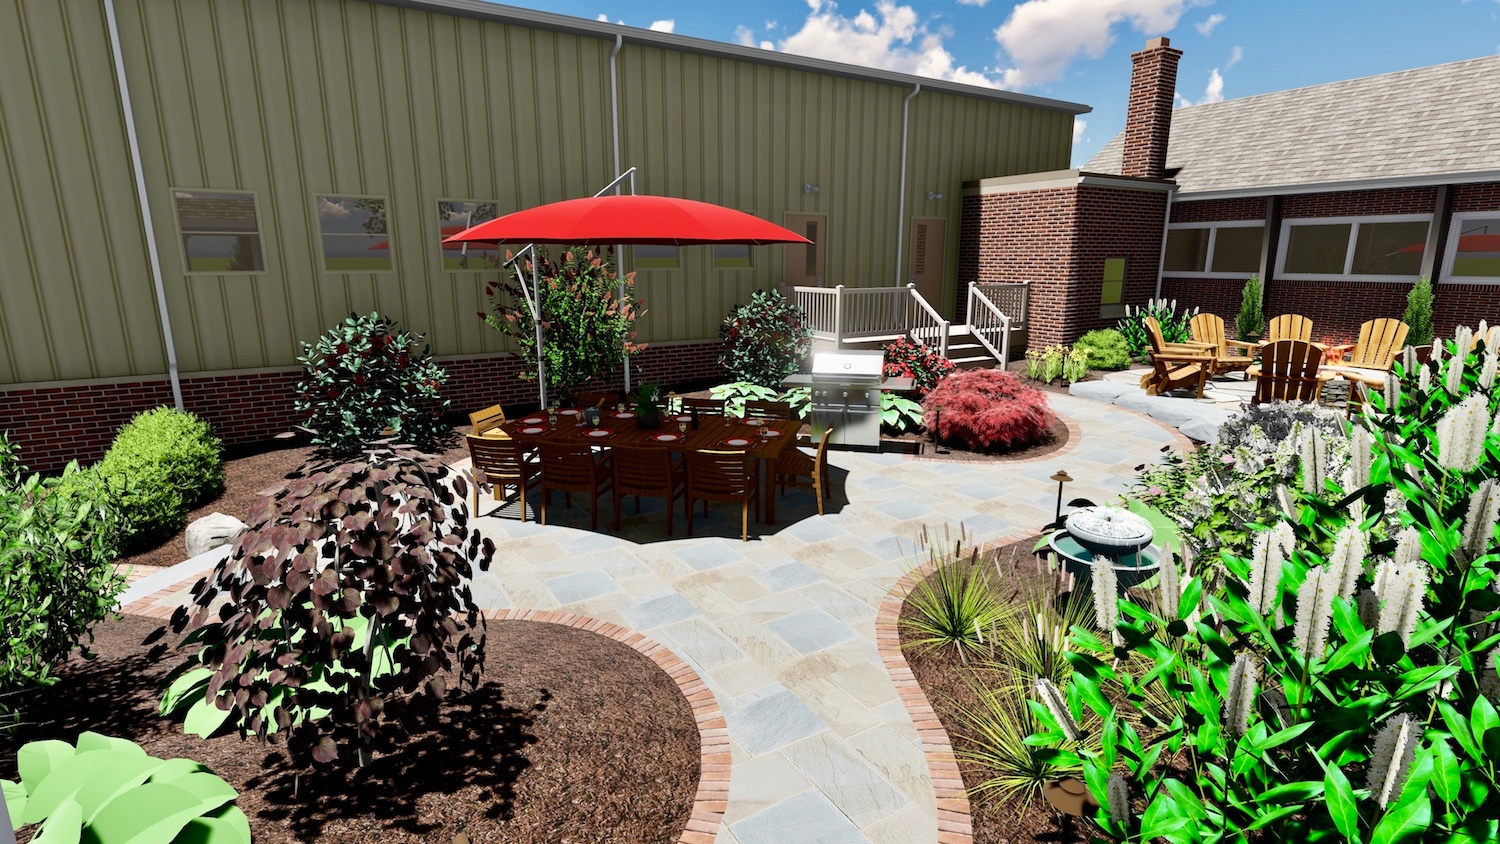 Important Considerations and Design Ideas for Landscaping Church Grounds